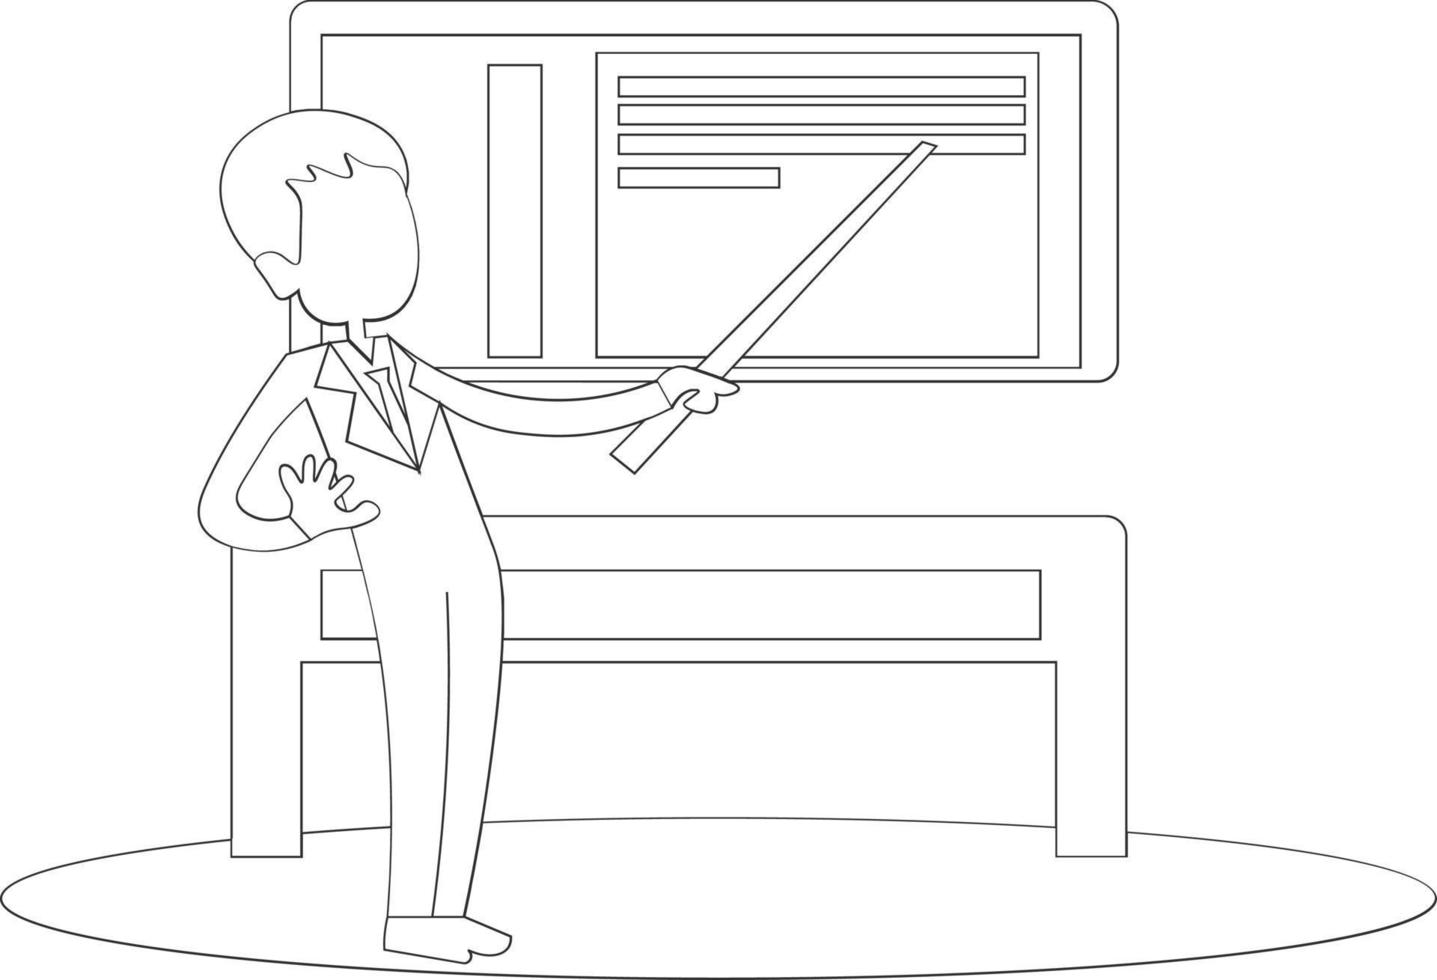 Managers are being chased by work deadlines. Out of time. Business metaphor. One line drawing design vector illustration